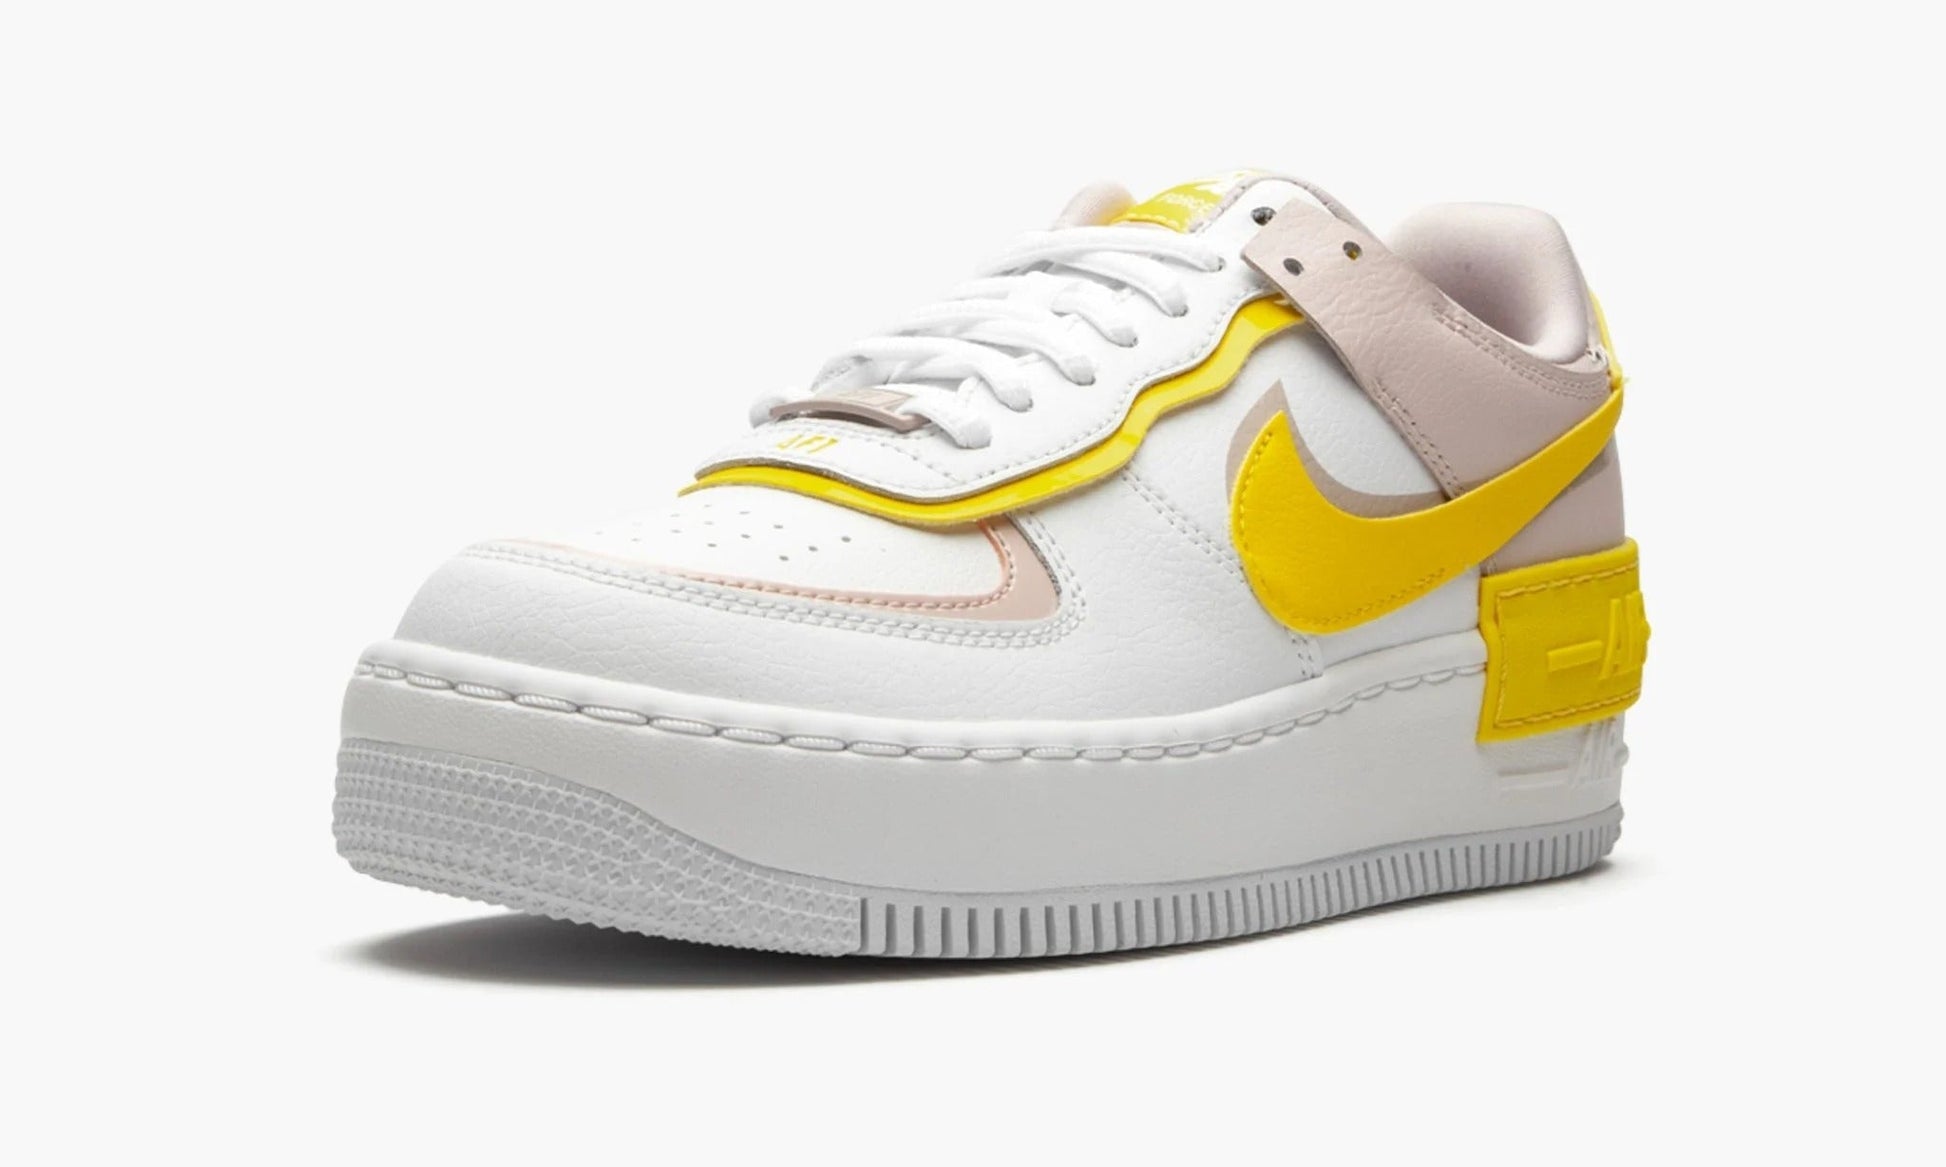 Nike air force 1 low shadow. Nike Air Force 1 Shadow Sunshine. Air Force 1 Shadow White. Nike Air Force Ambush wayoff. Air Force Sunshine.